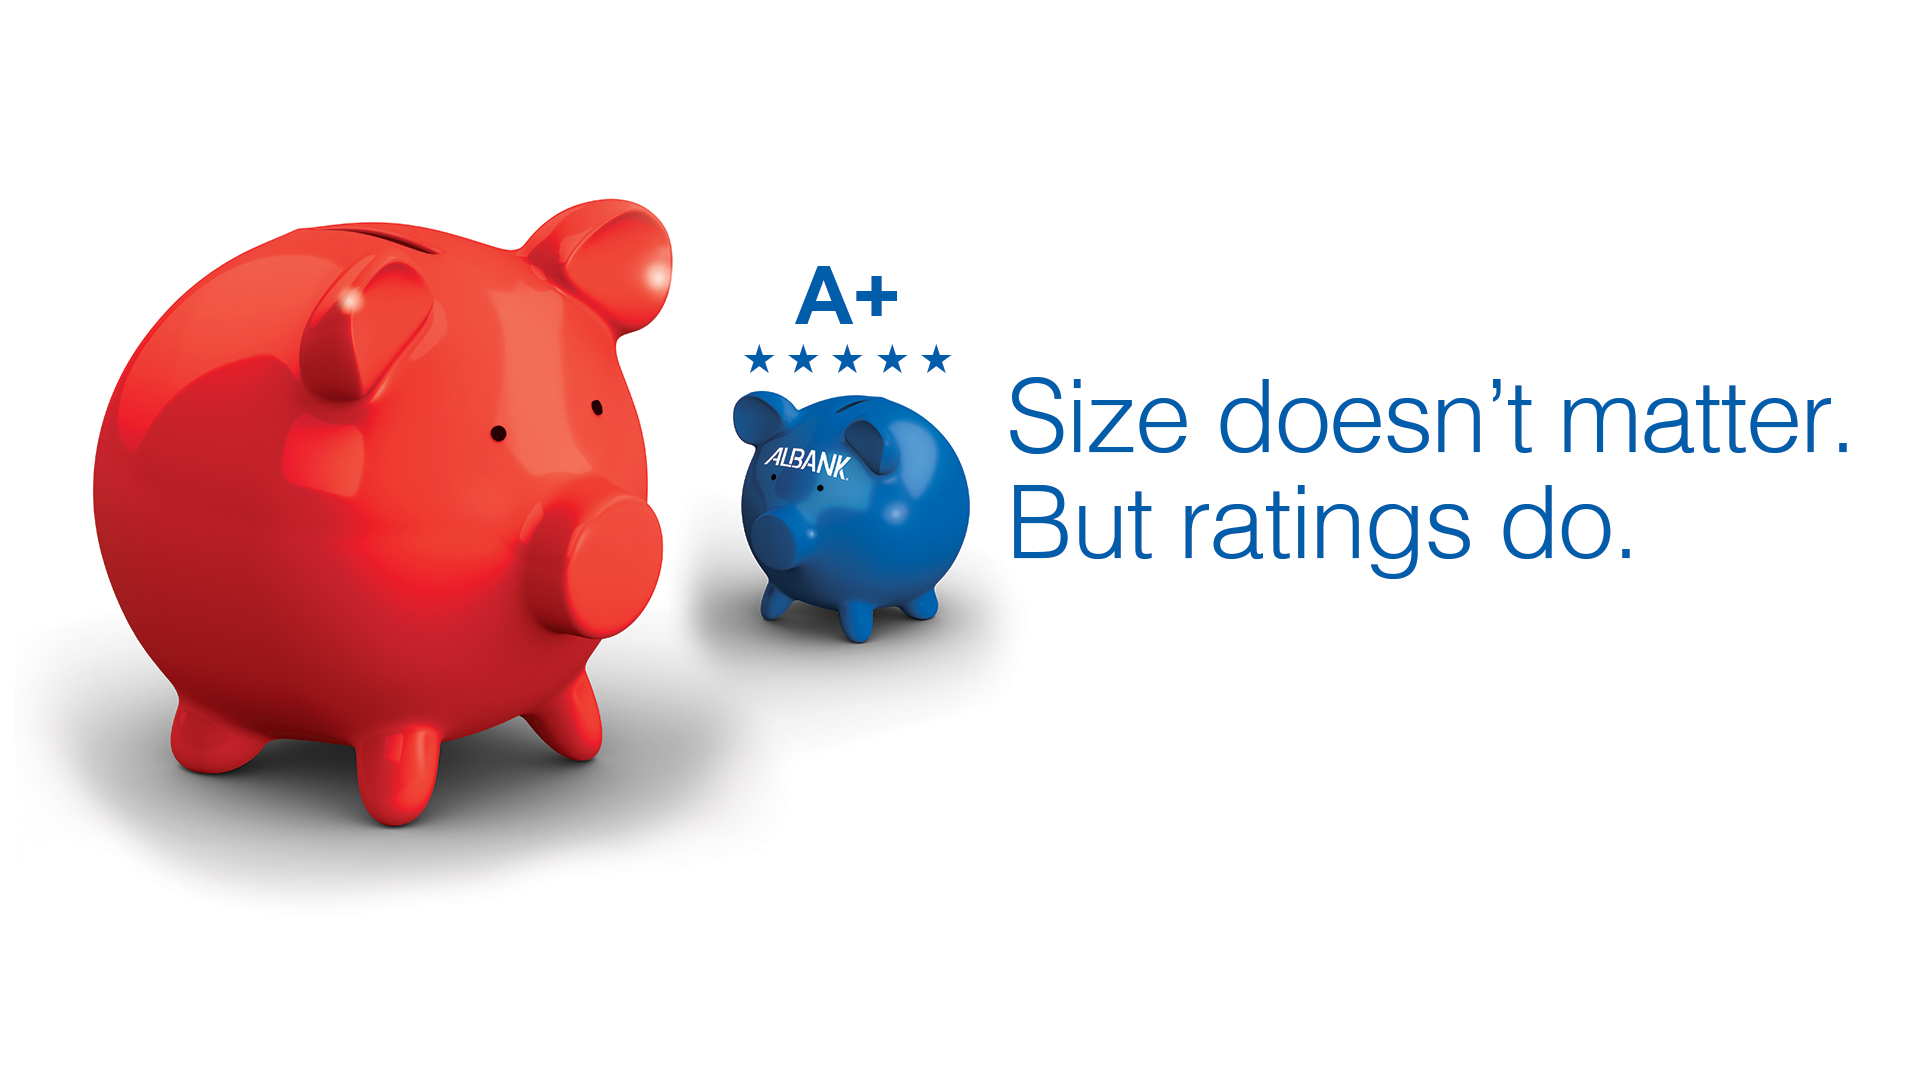 Size doesn't matter. But ratings do.